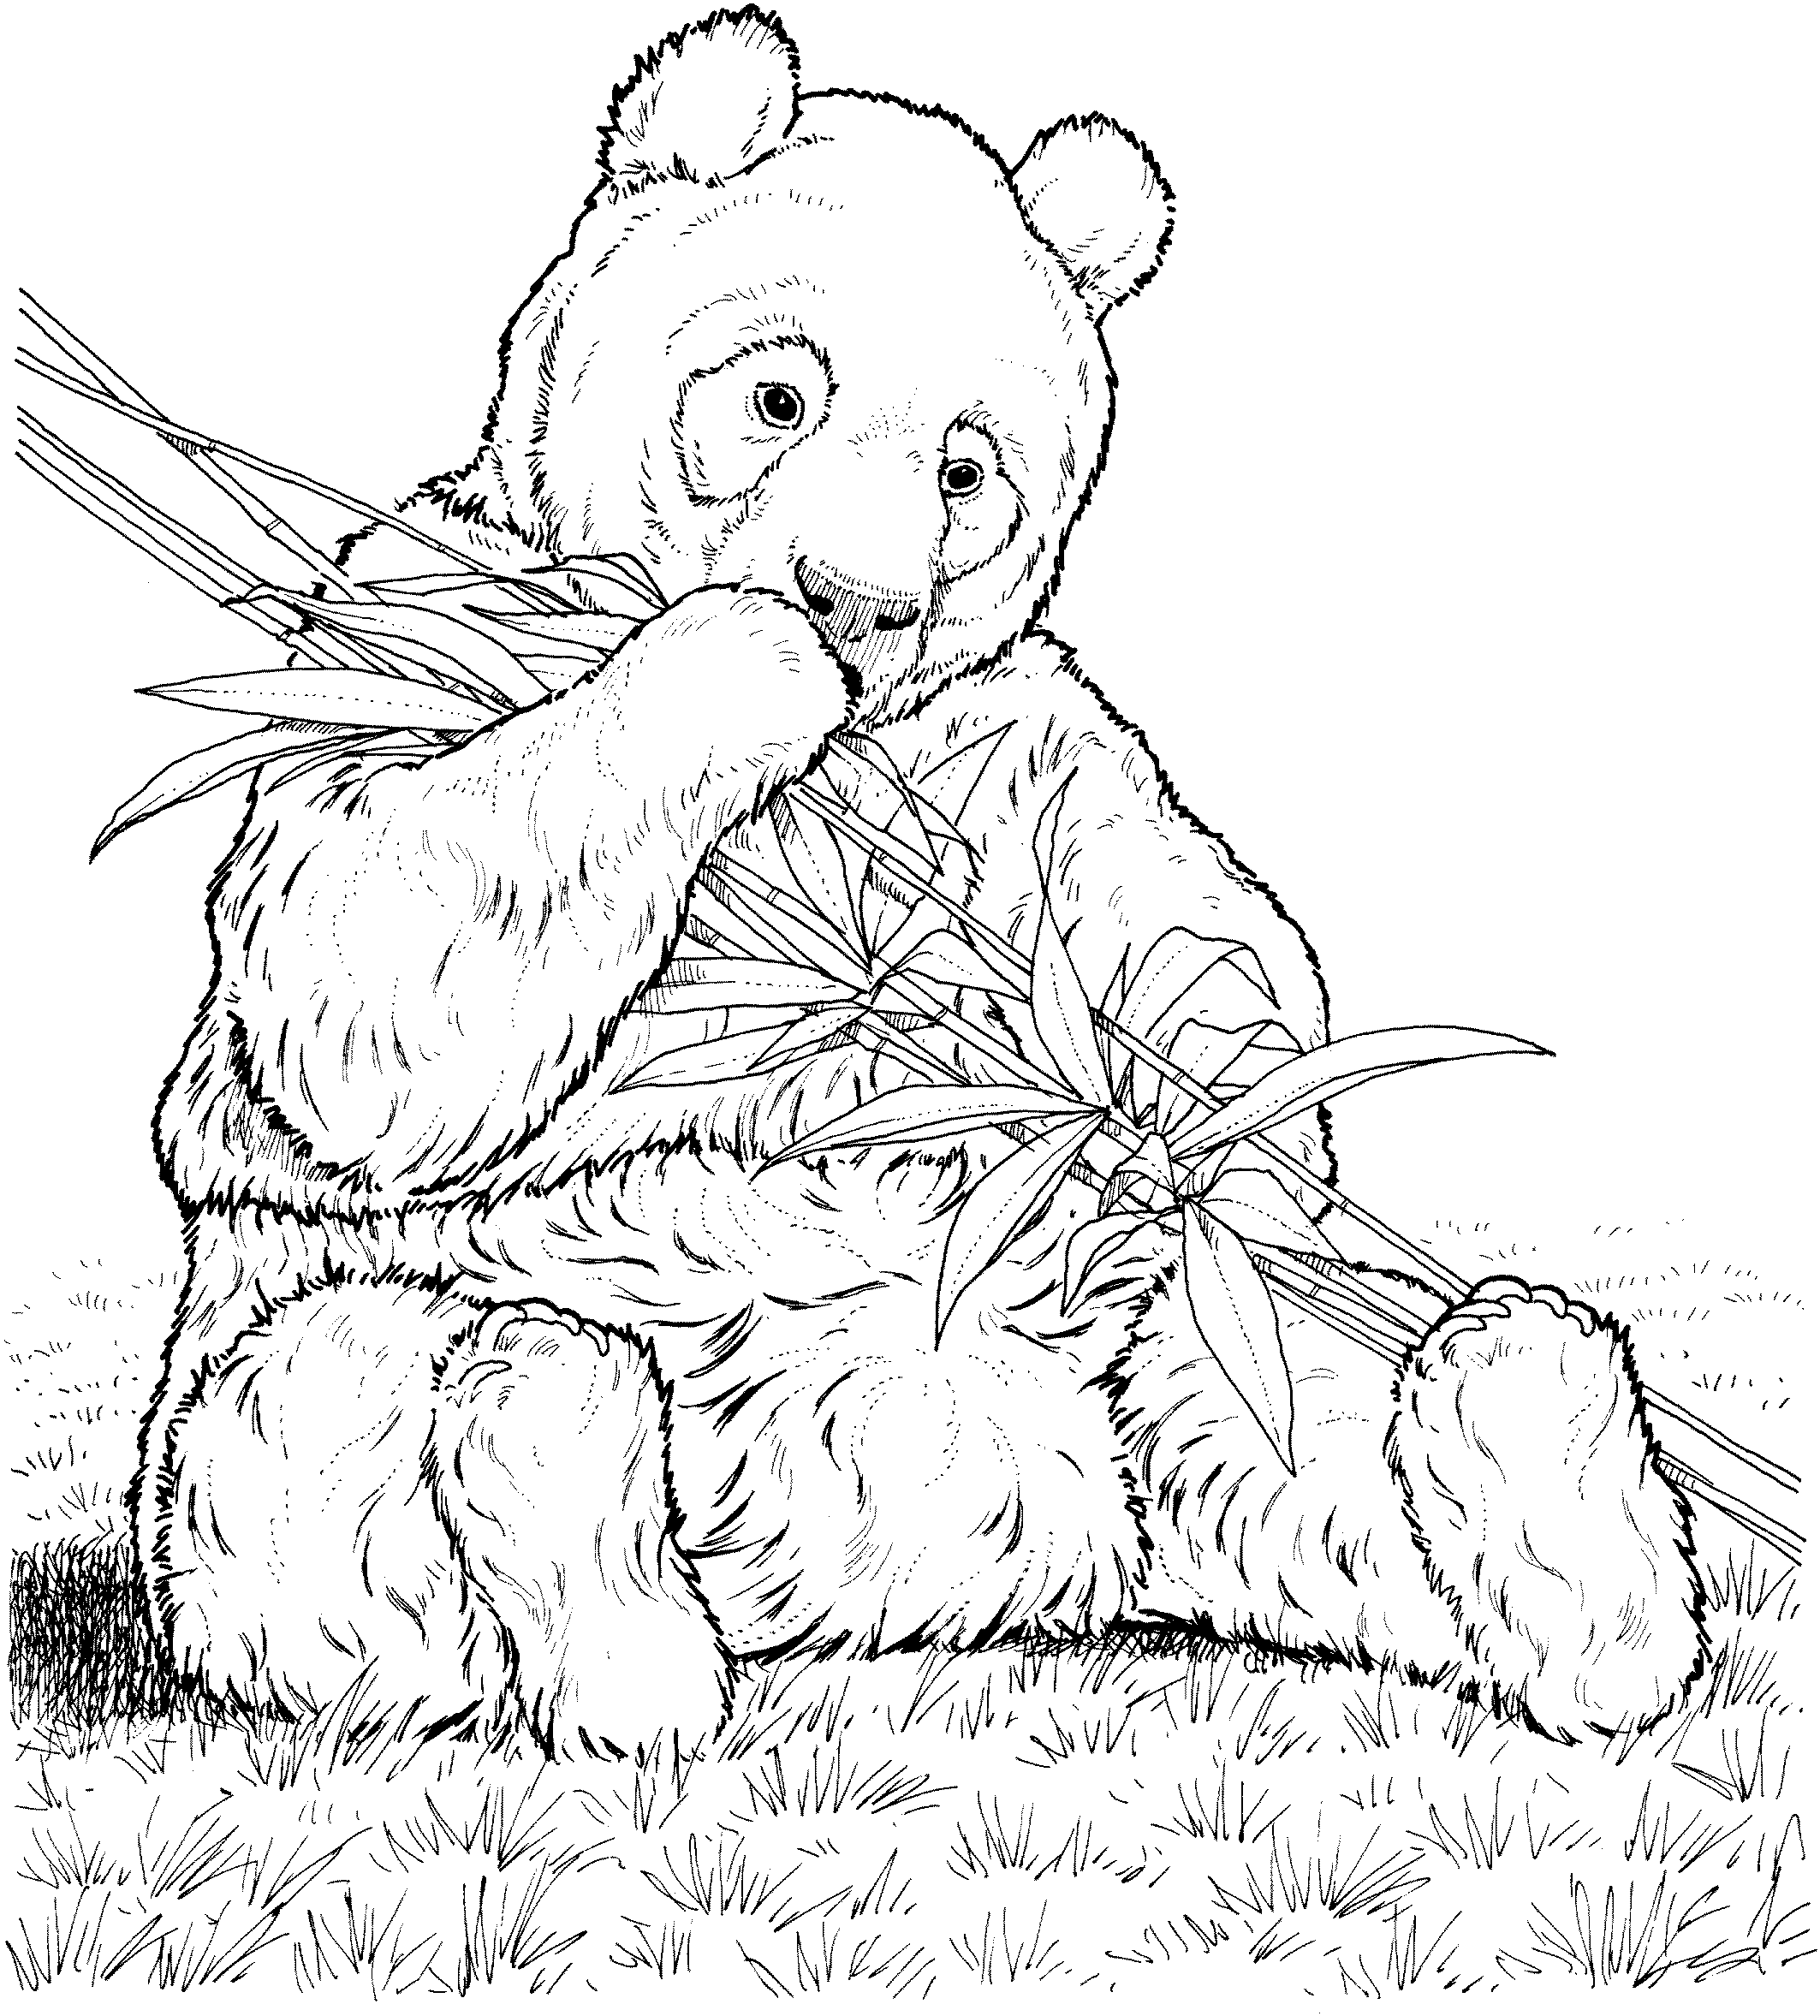 panda coloring page panda coloring pages best coloring pages for kids page panda coloring 1 2